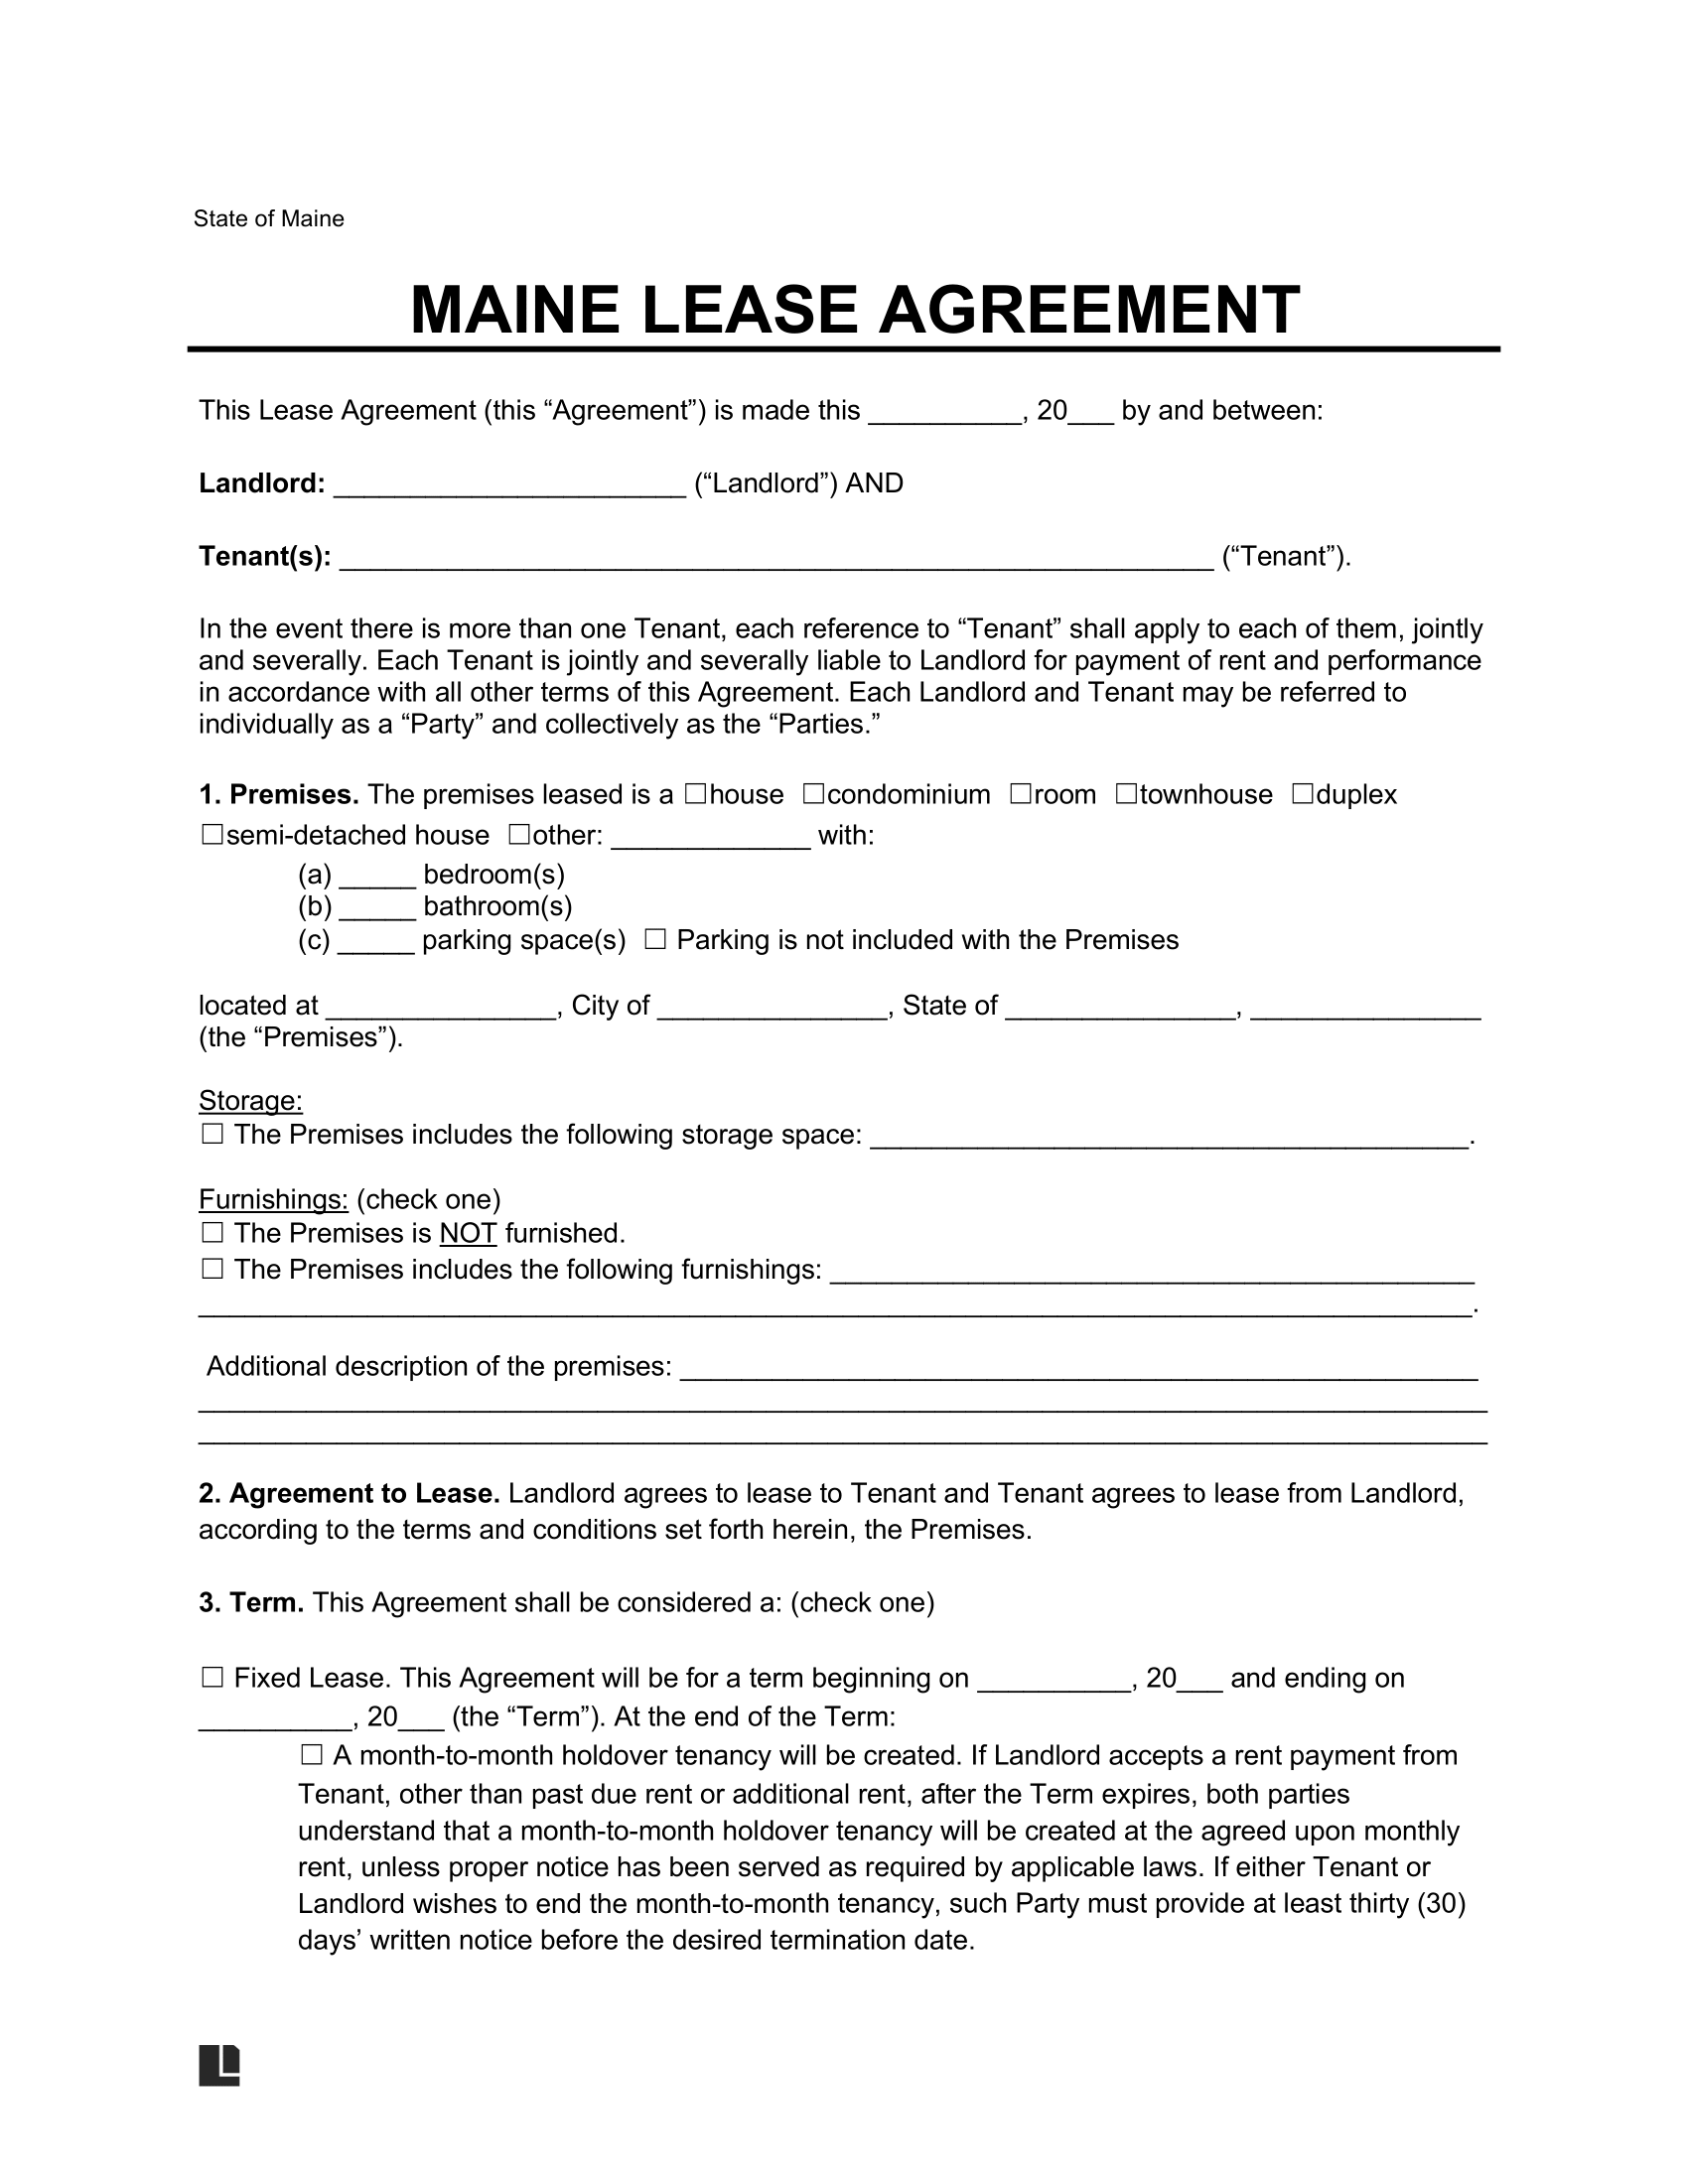 Maine Residential Lease Agreement Template